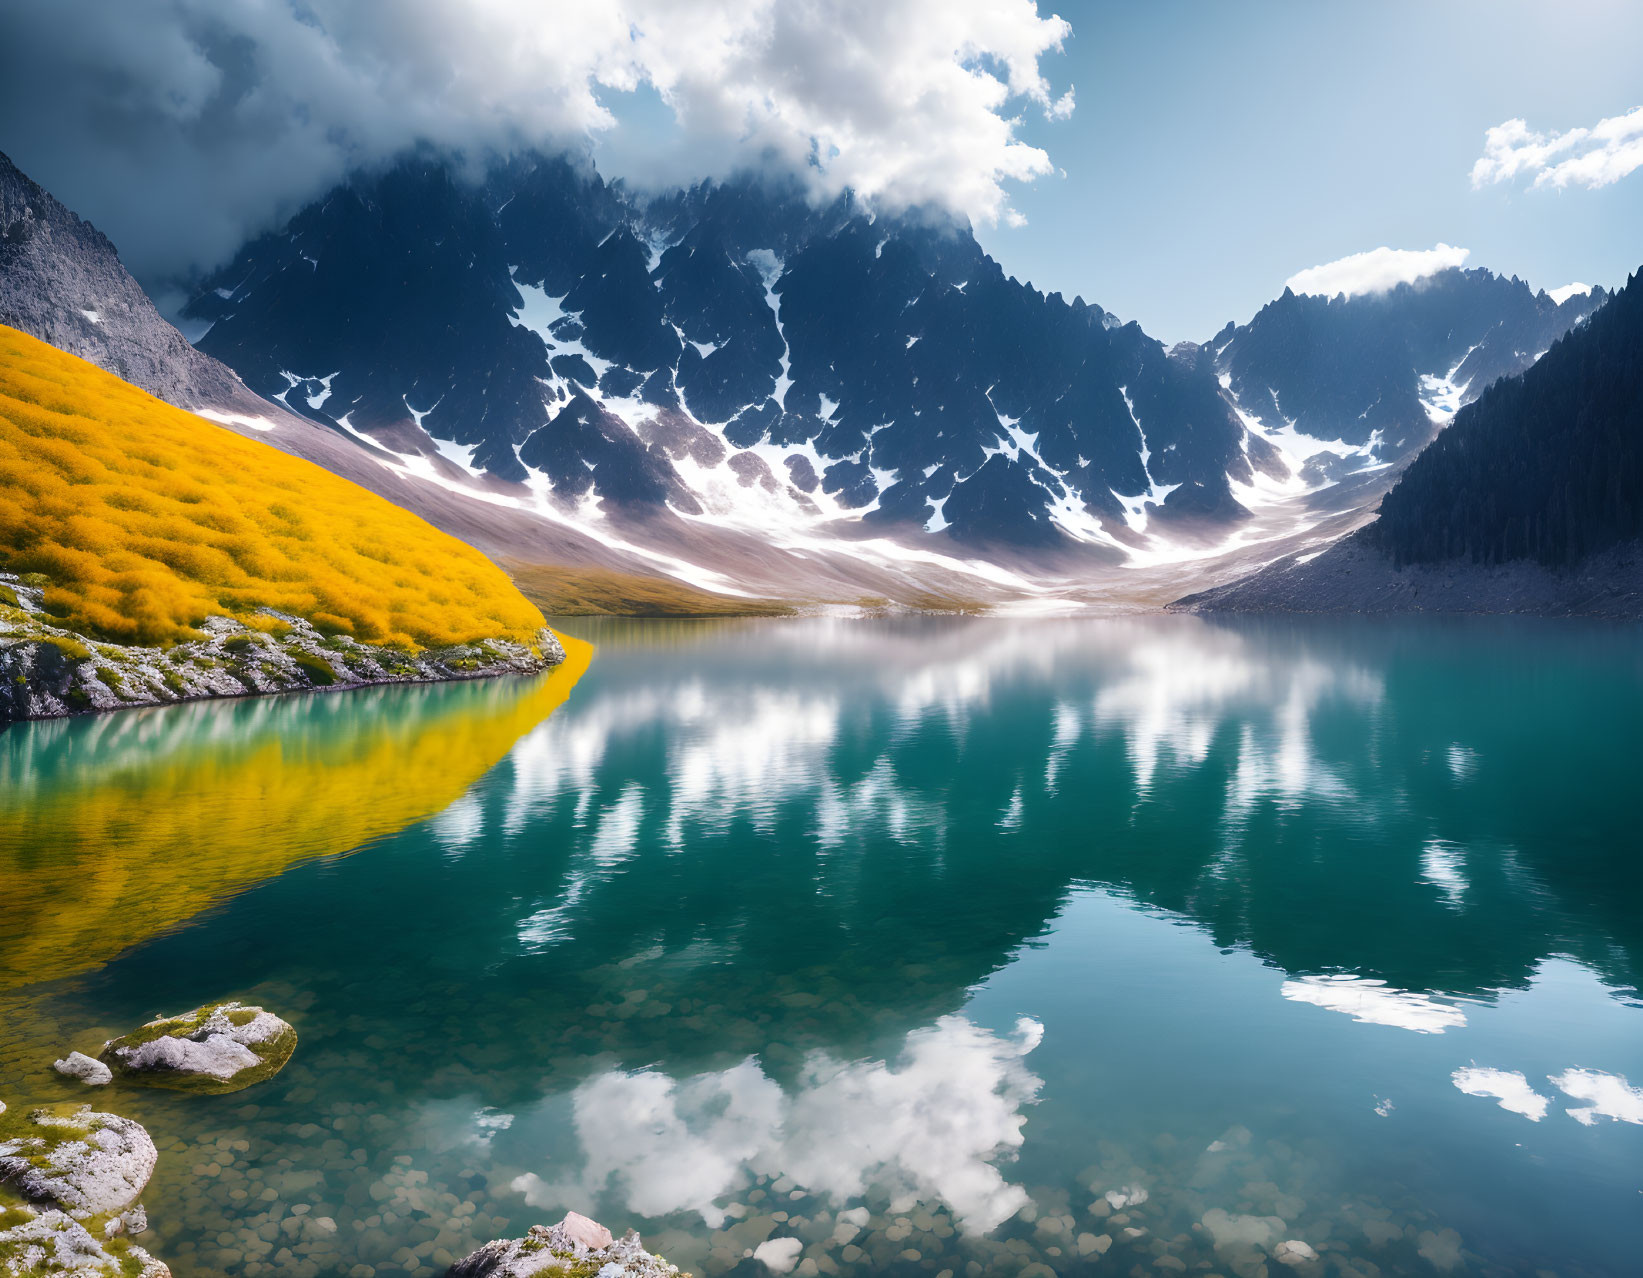 Tranquil mountain lake with snow-capped peaks and yellow hillside